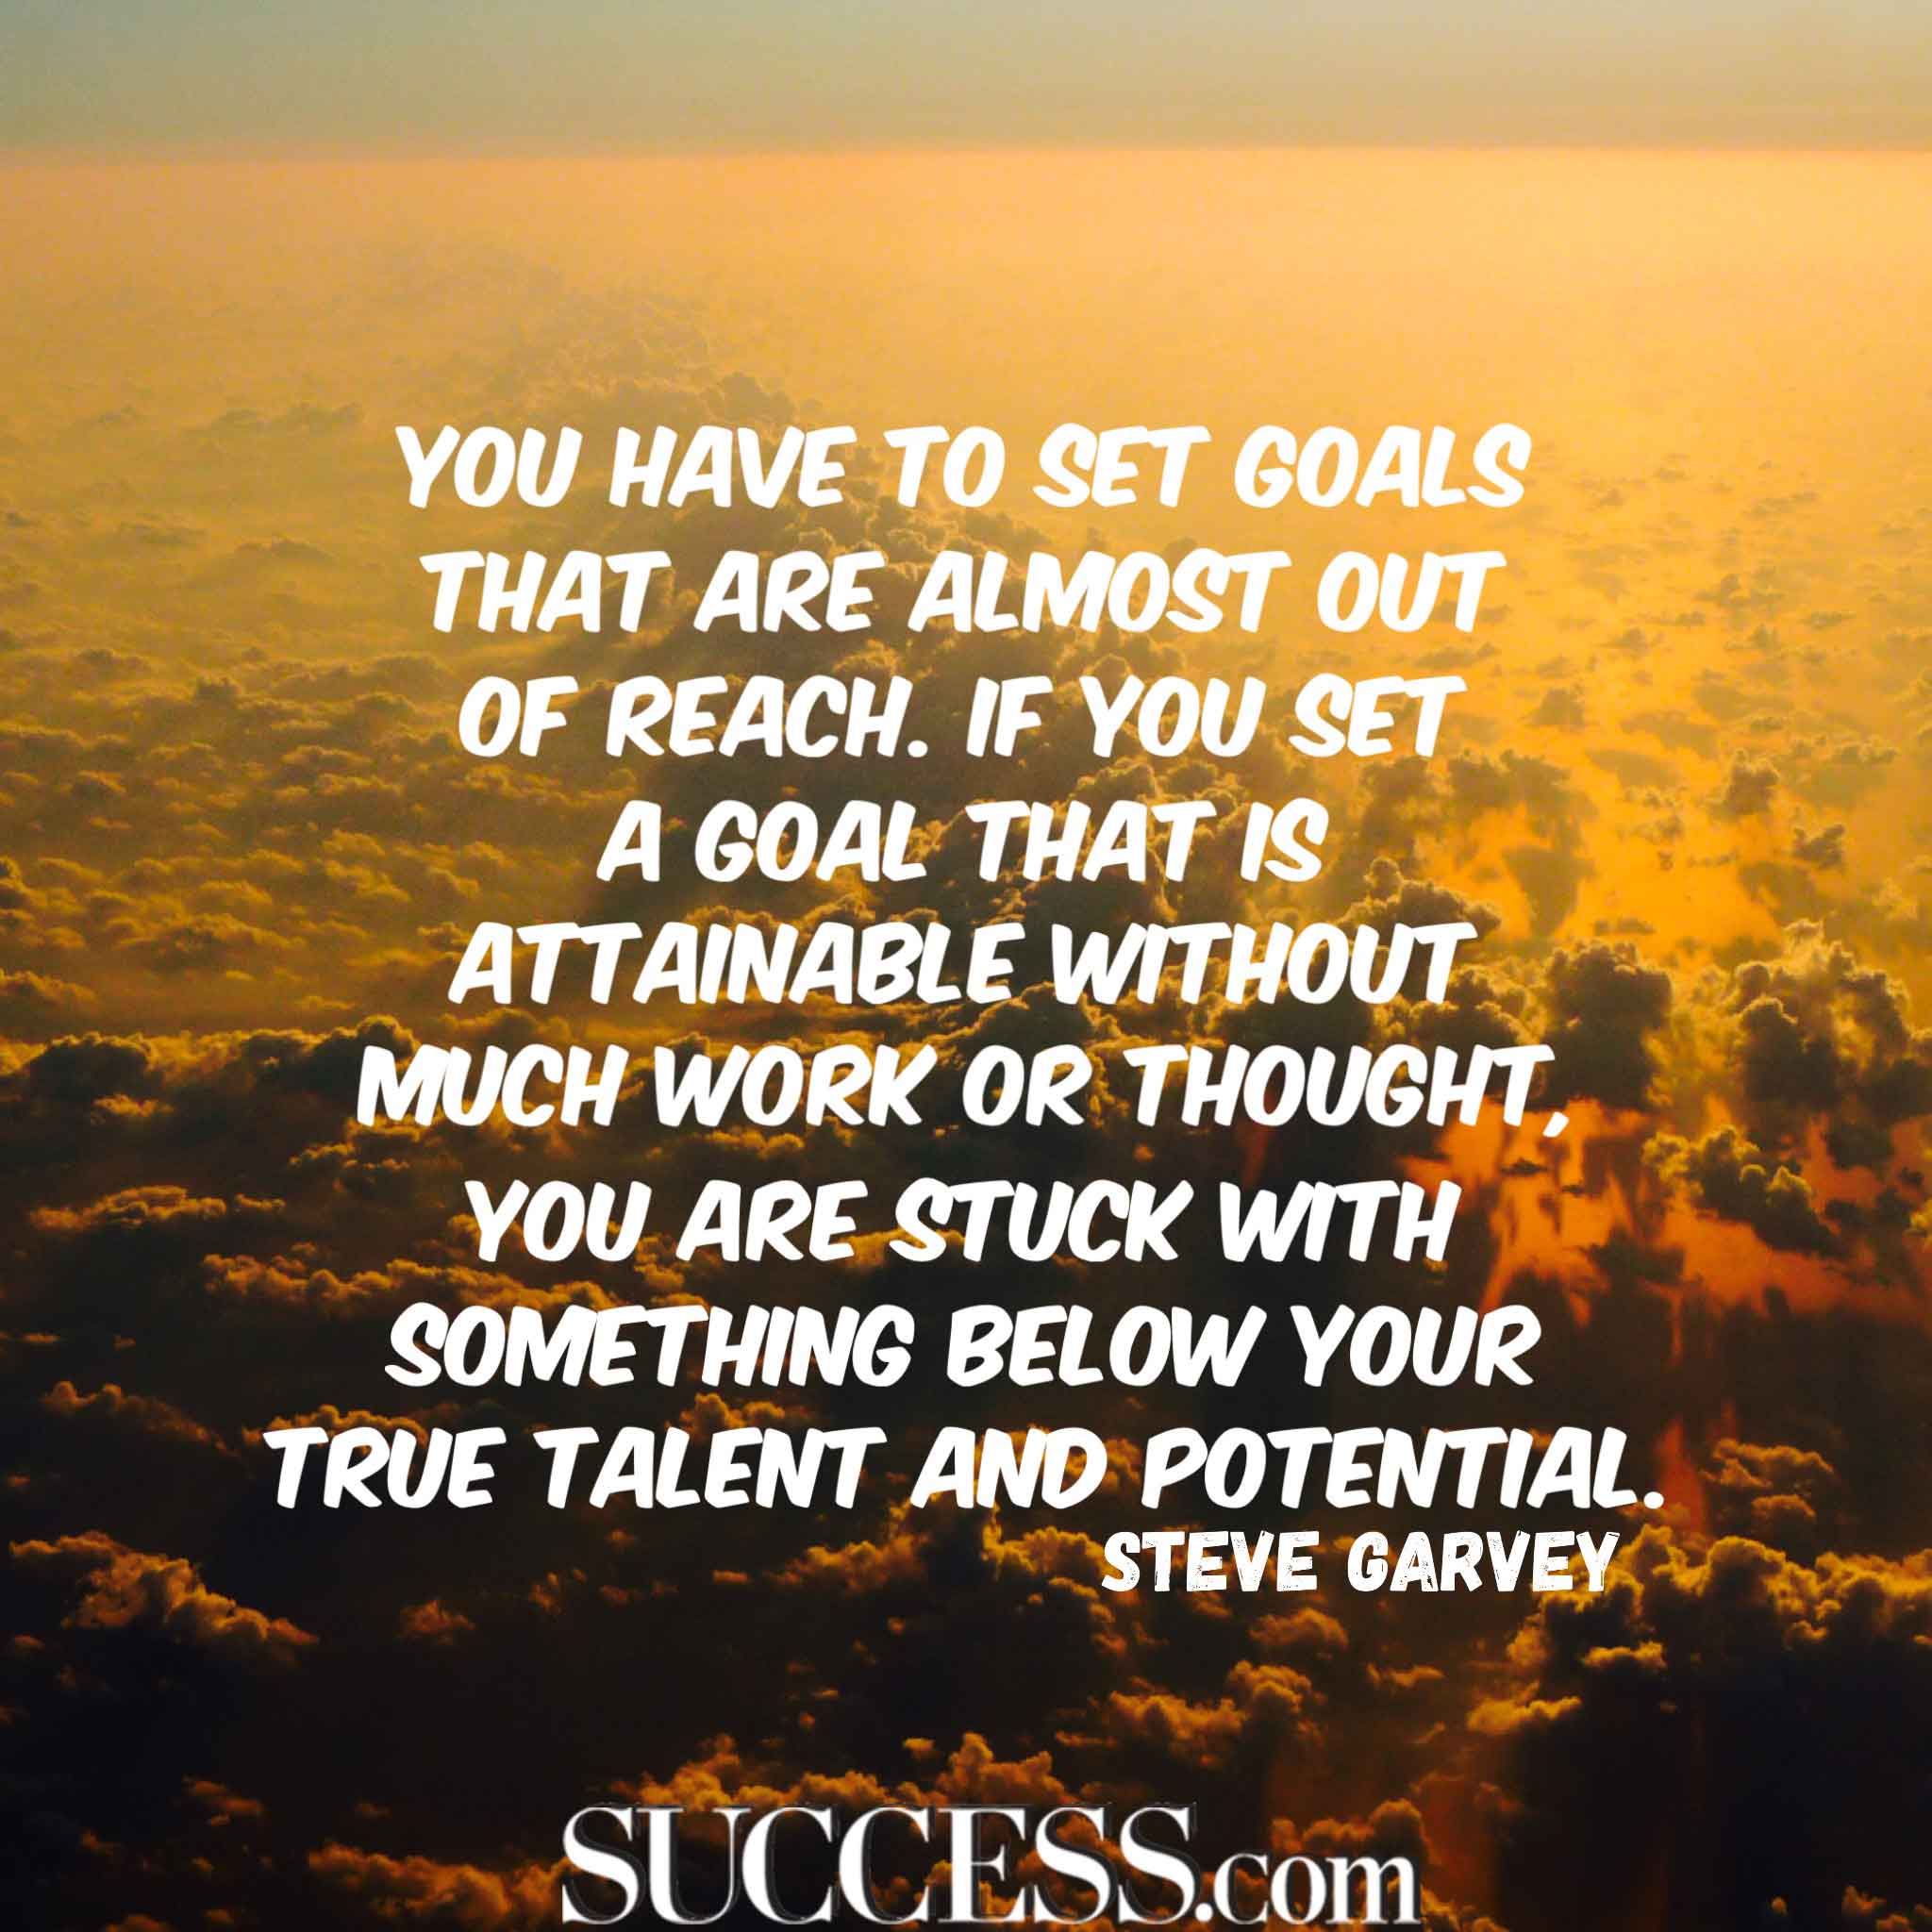 18 Motivational Quotes About Successful Goal Setting - SUCCESS